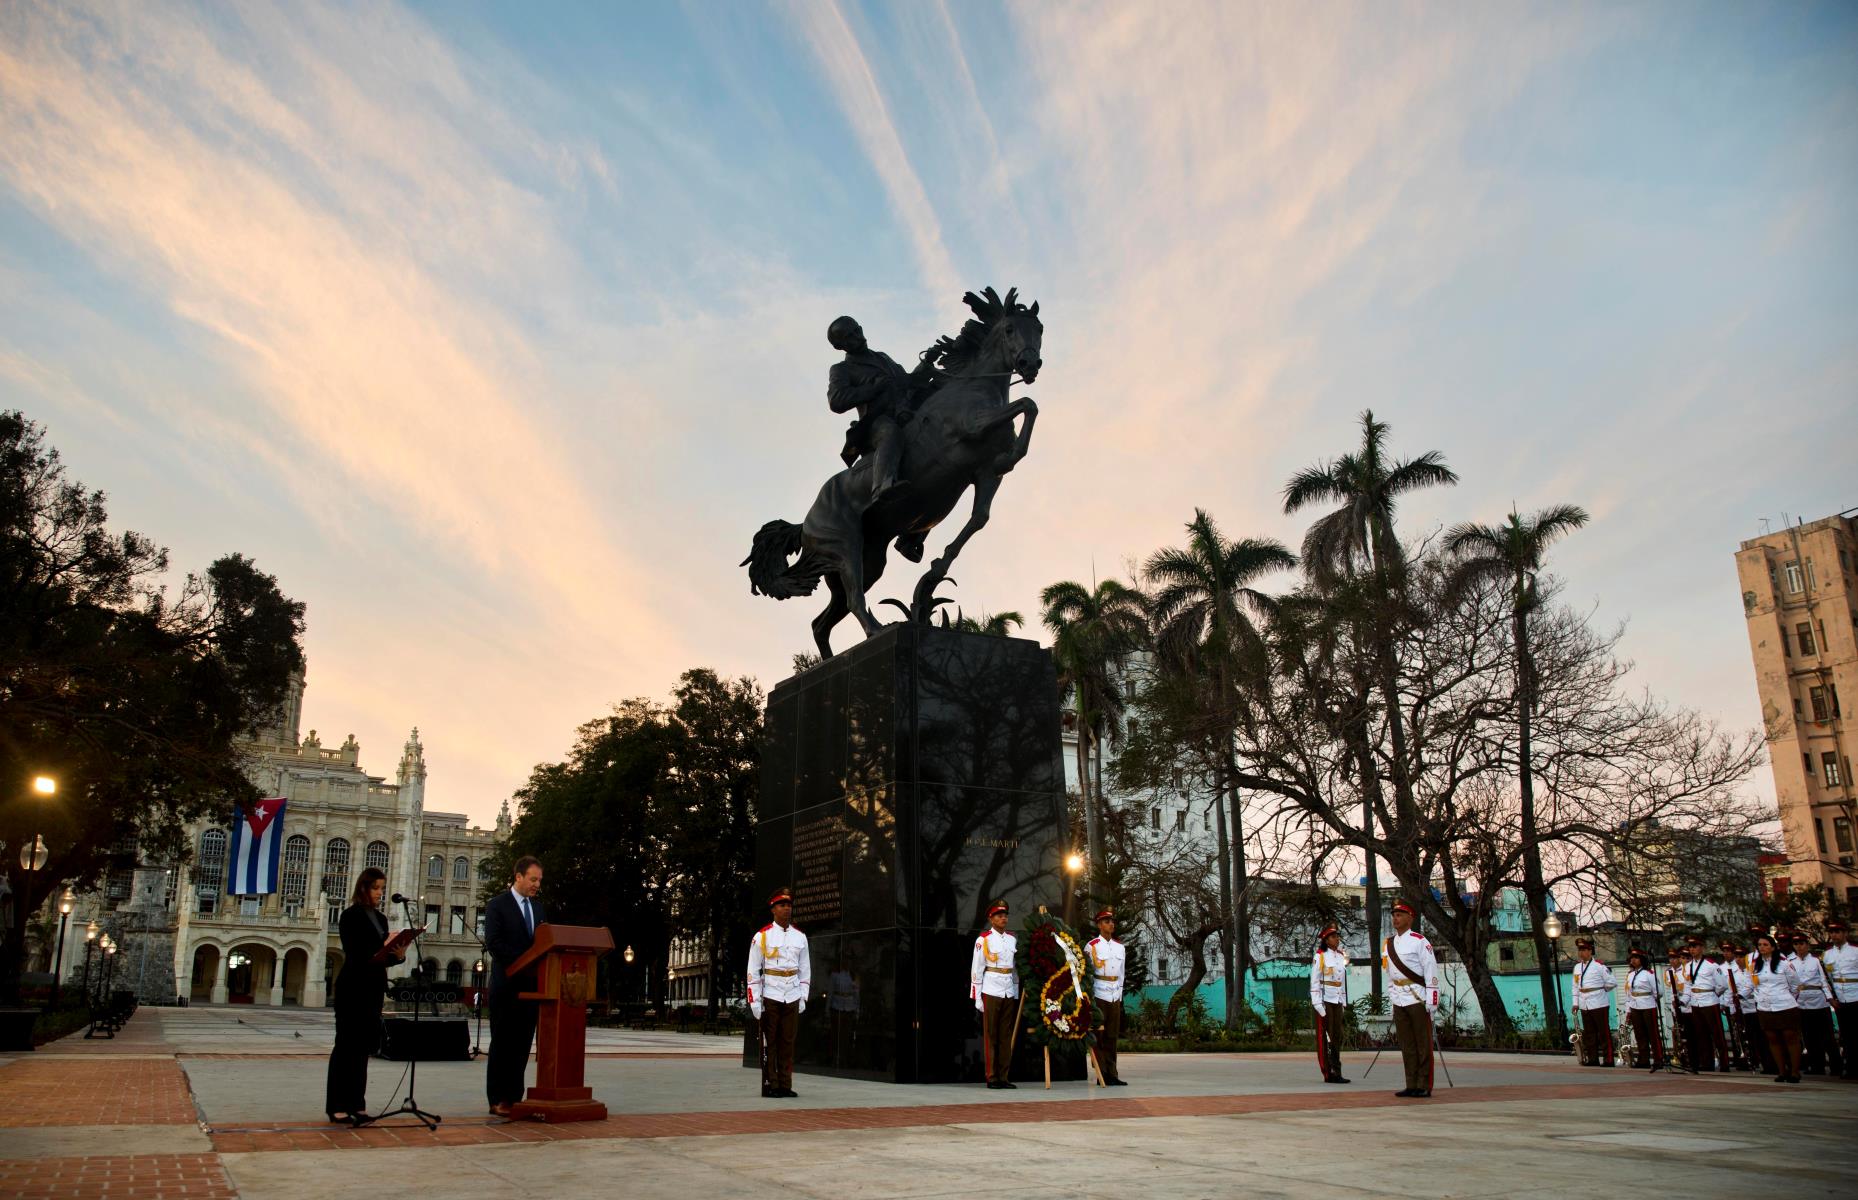 14-astonishing-facts-about-the-jose-marti-statue